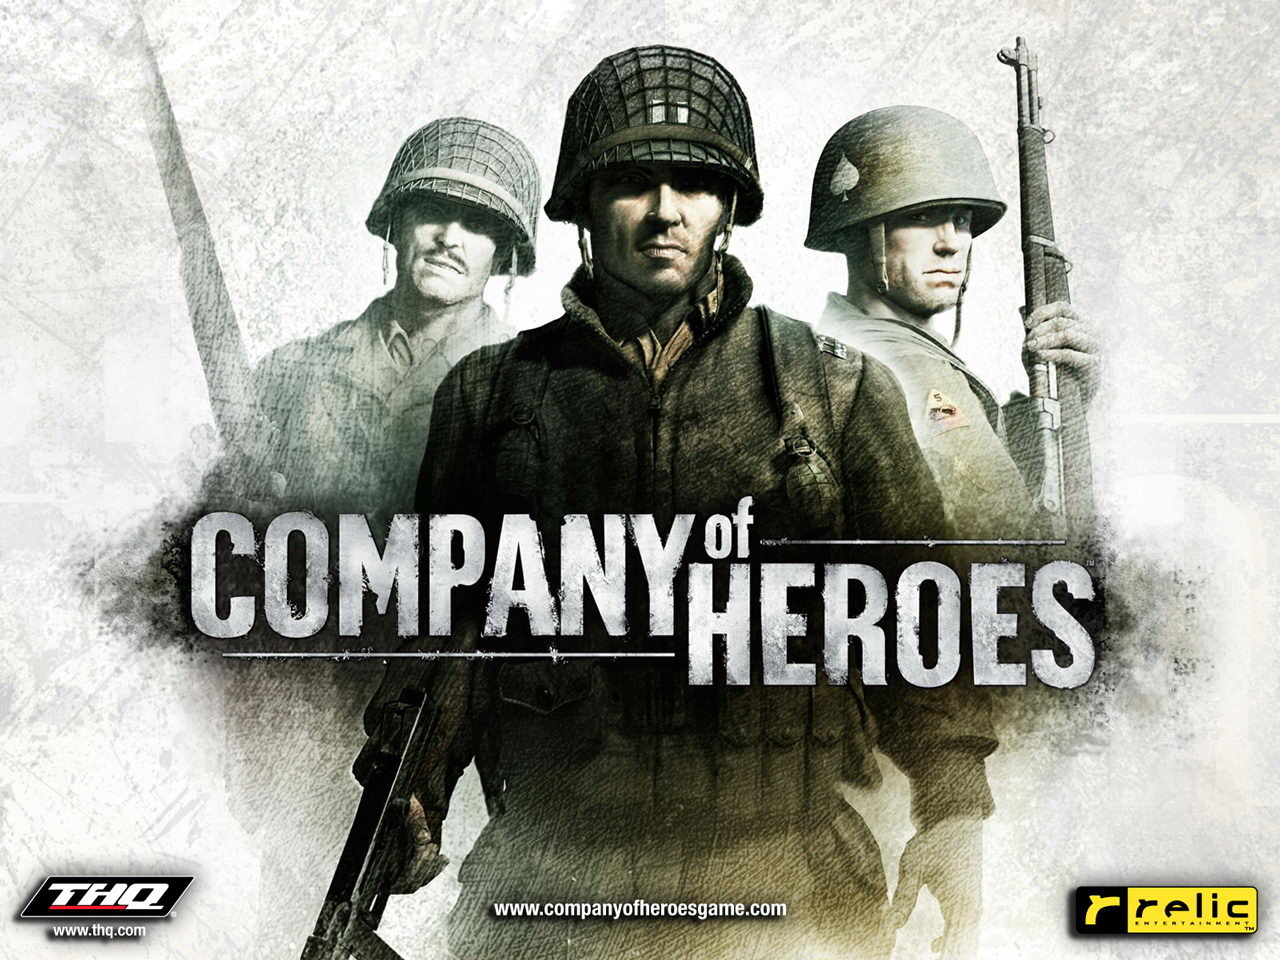 Company of heroes maps for steam фото 39